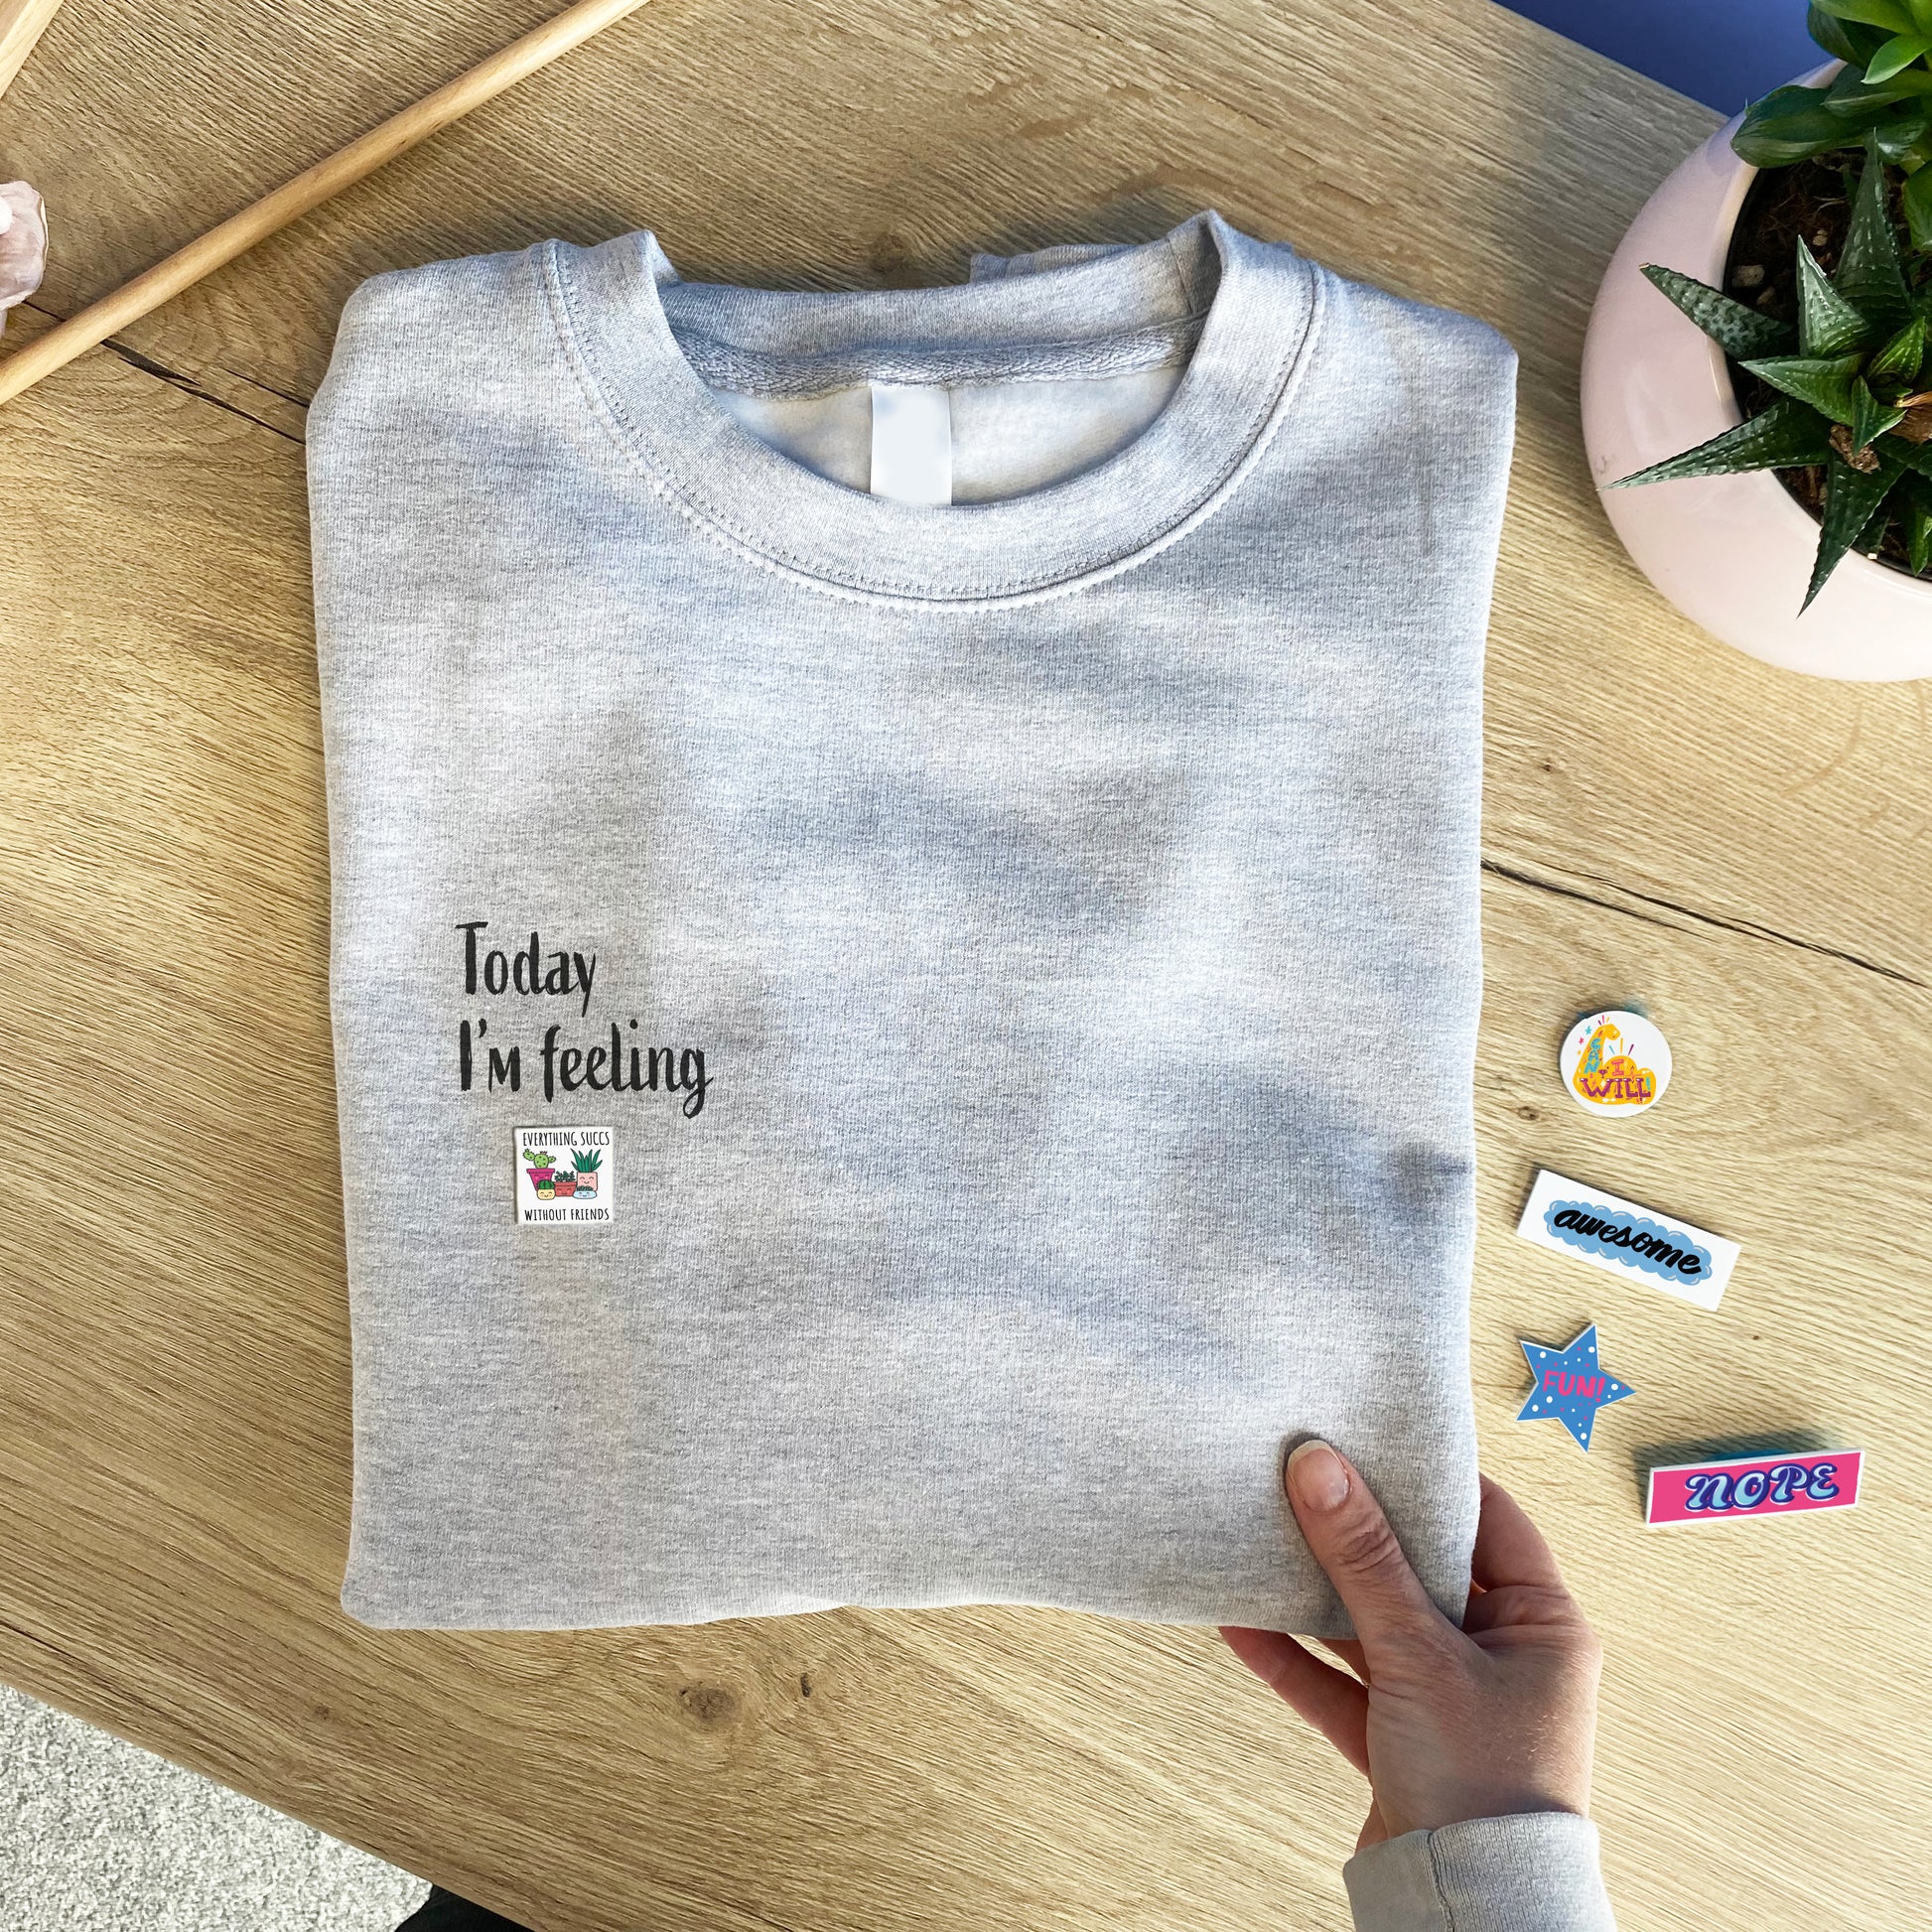 today I am feeling pin sweatshirt with changeable pins for mood need friends pin